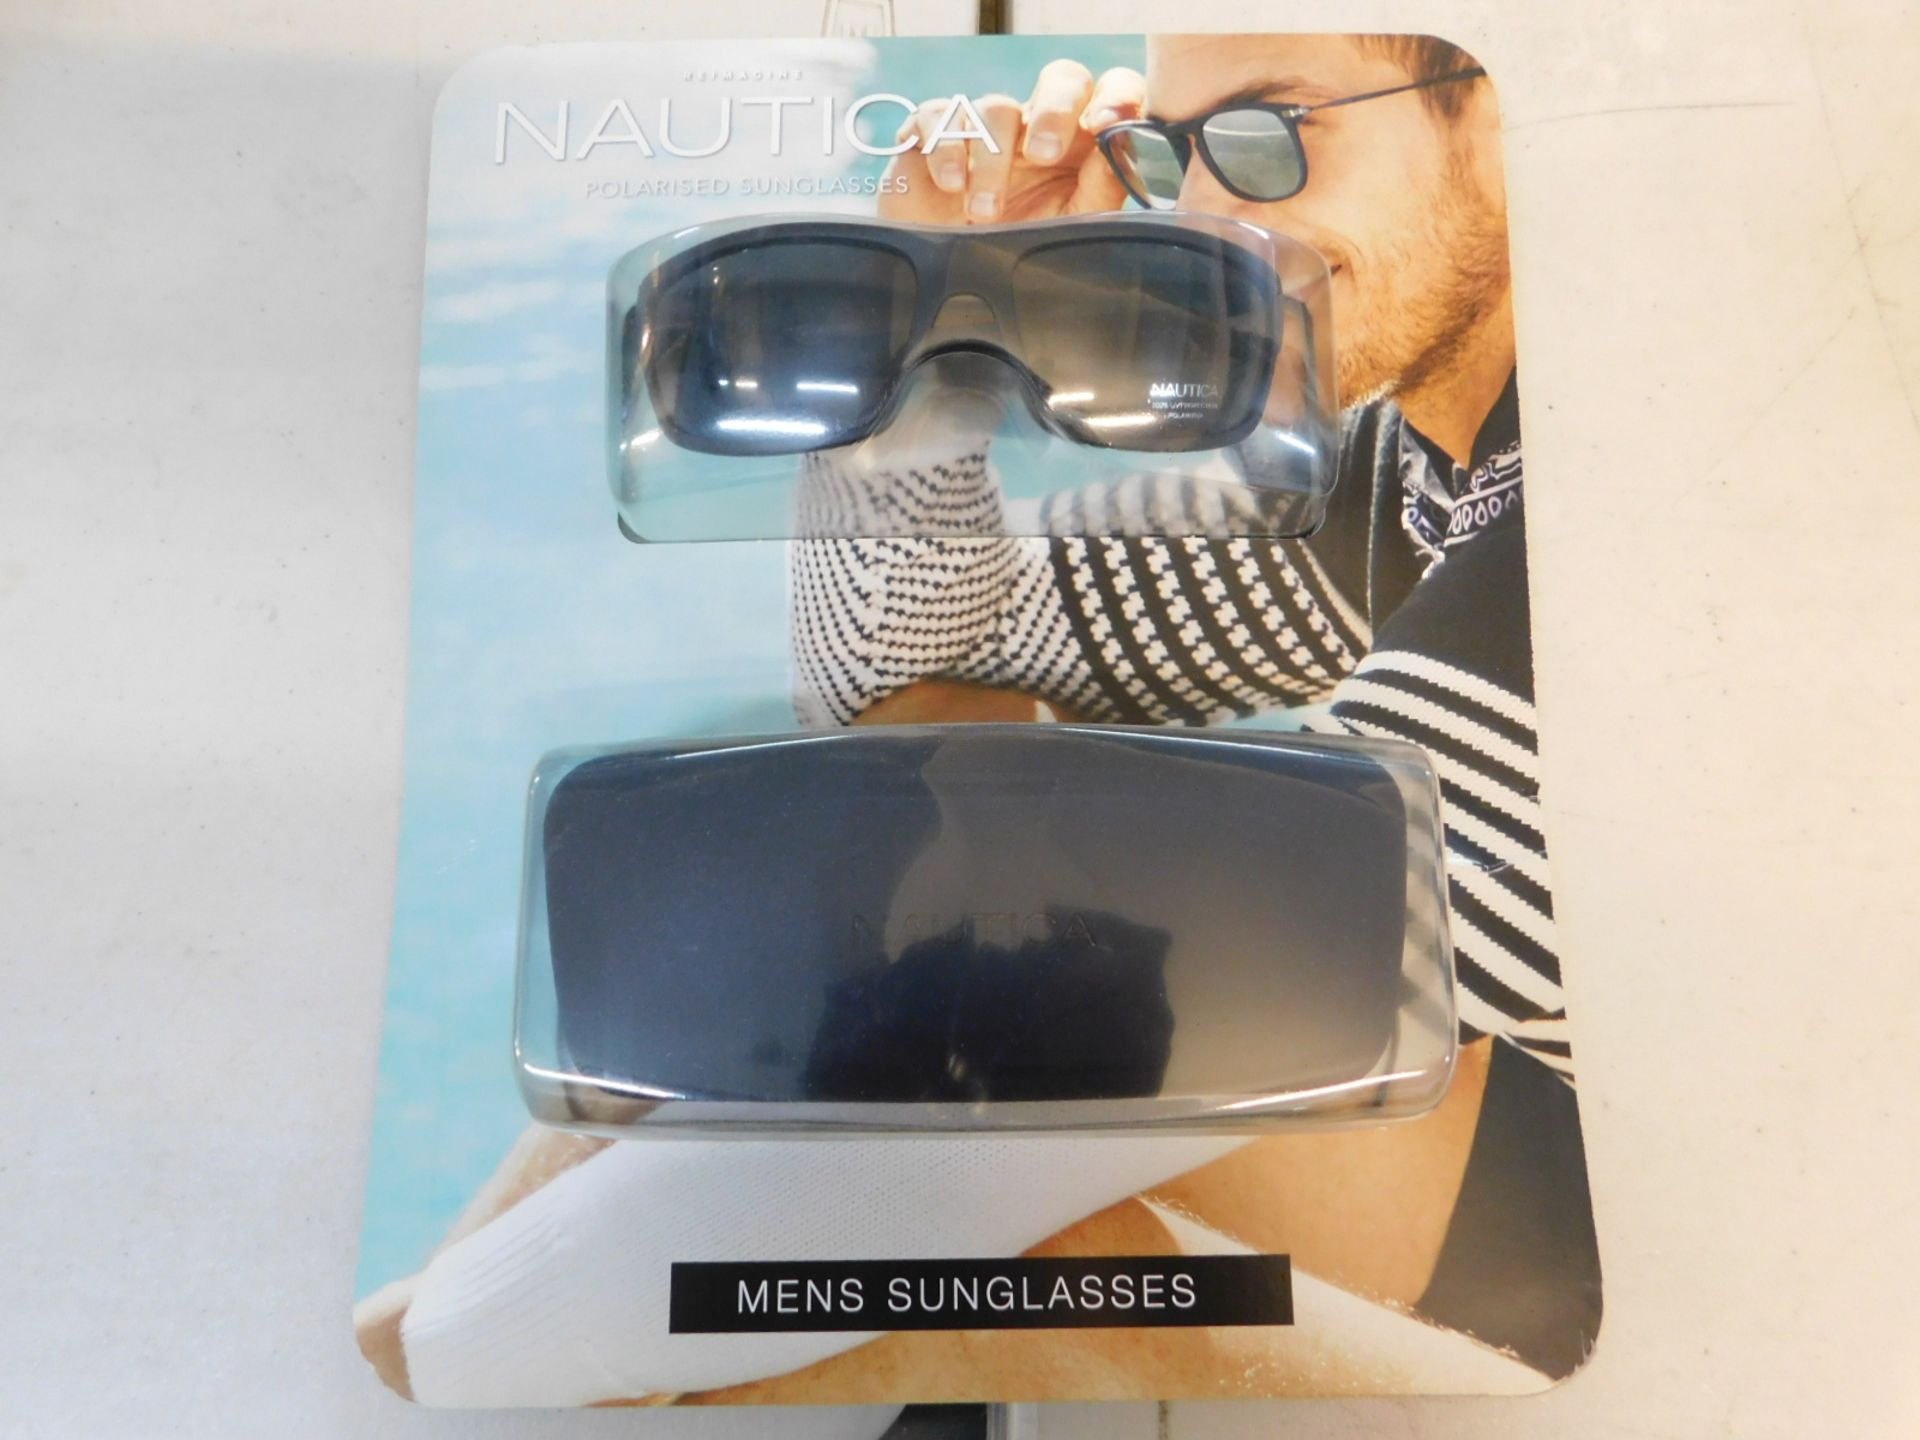 1 BRAND NEW PACK OF NAUTICA GENTS SUNGLASSES WITH CARRY CASE RRP Â£99